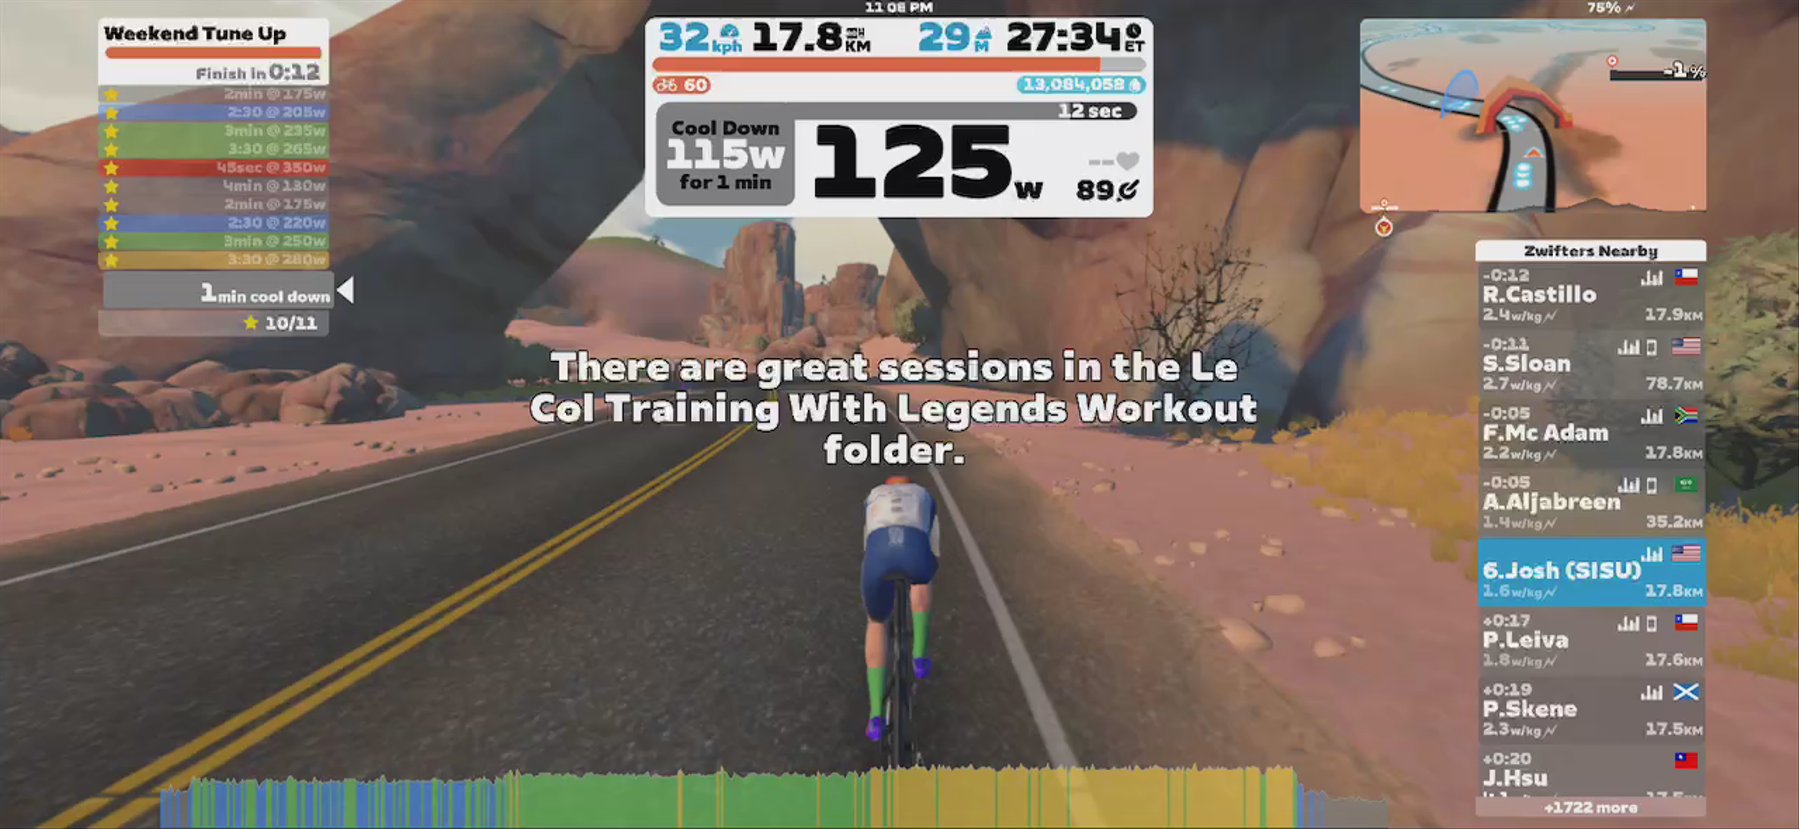 Zwift - Le Col - Training With Legends - Fabian Cancellara - Weekend Tune Up in Watopia